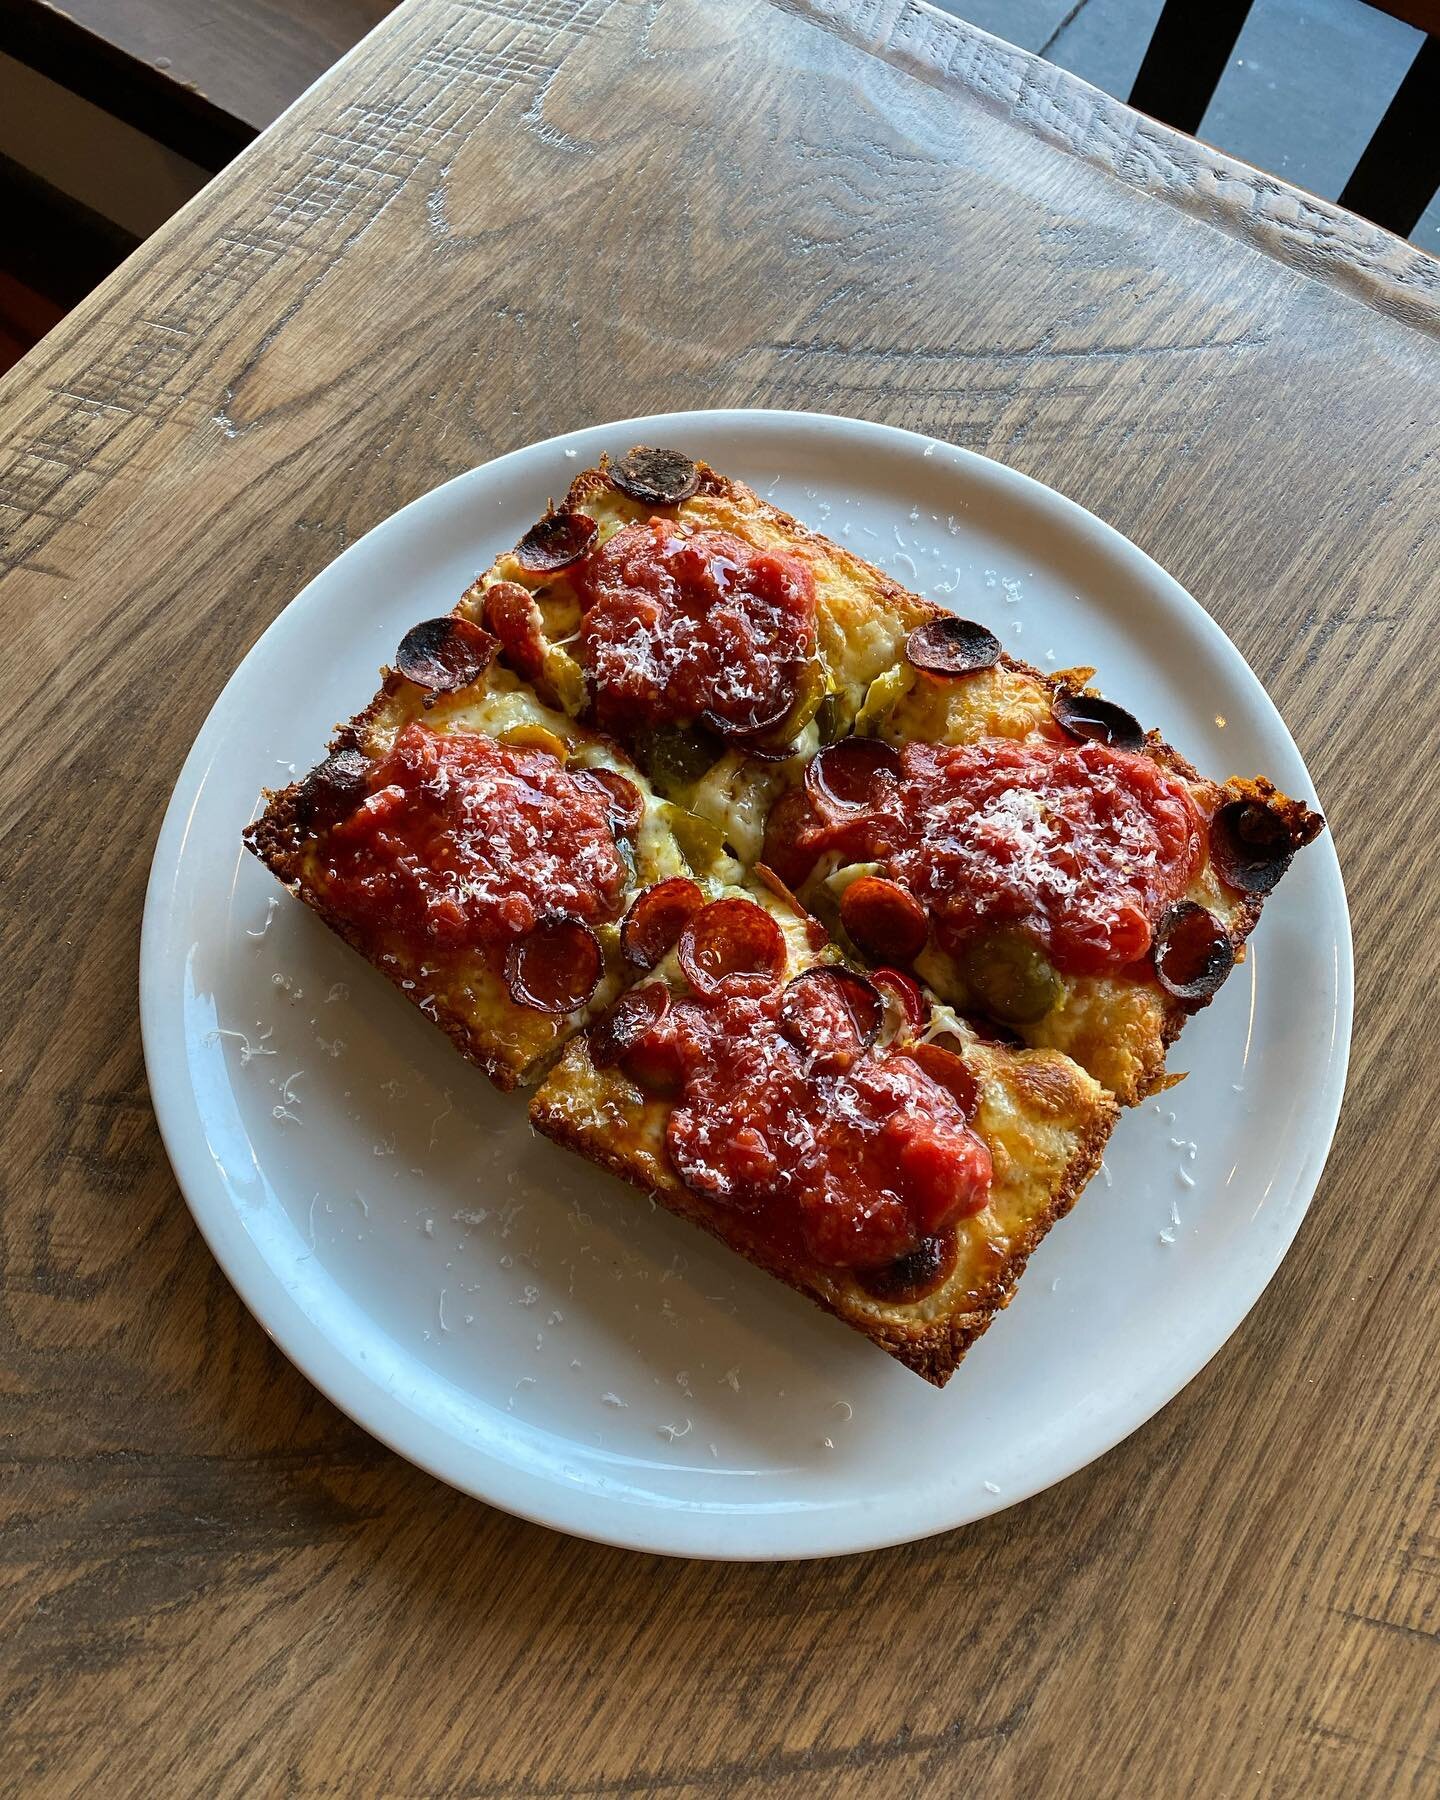 Nothin spooky about this Hot Cherry Pepper. Grab one this Hallo-weekend 🎃👻

&bull;Cheese Blend, Bianco Di Napoli Tomato Sauce, Hot Cherry Peppers, Ezzo Cup &amp; Char Pepperoni, Chili Honey, Parmigiano Reggiano